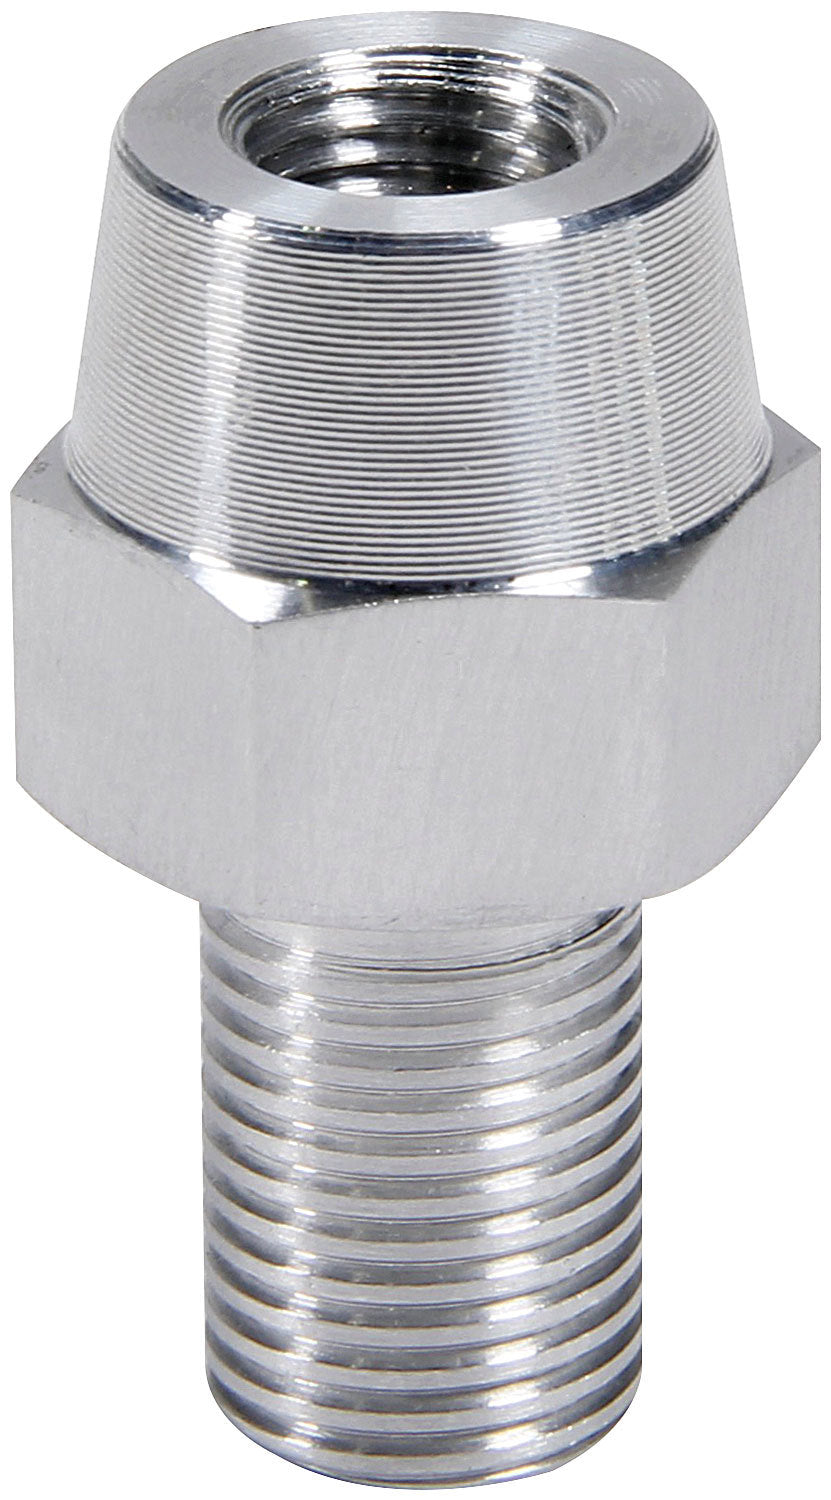 Hood Pin Adapter 1/2-20 Male to 3/8-24 Female